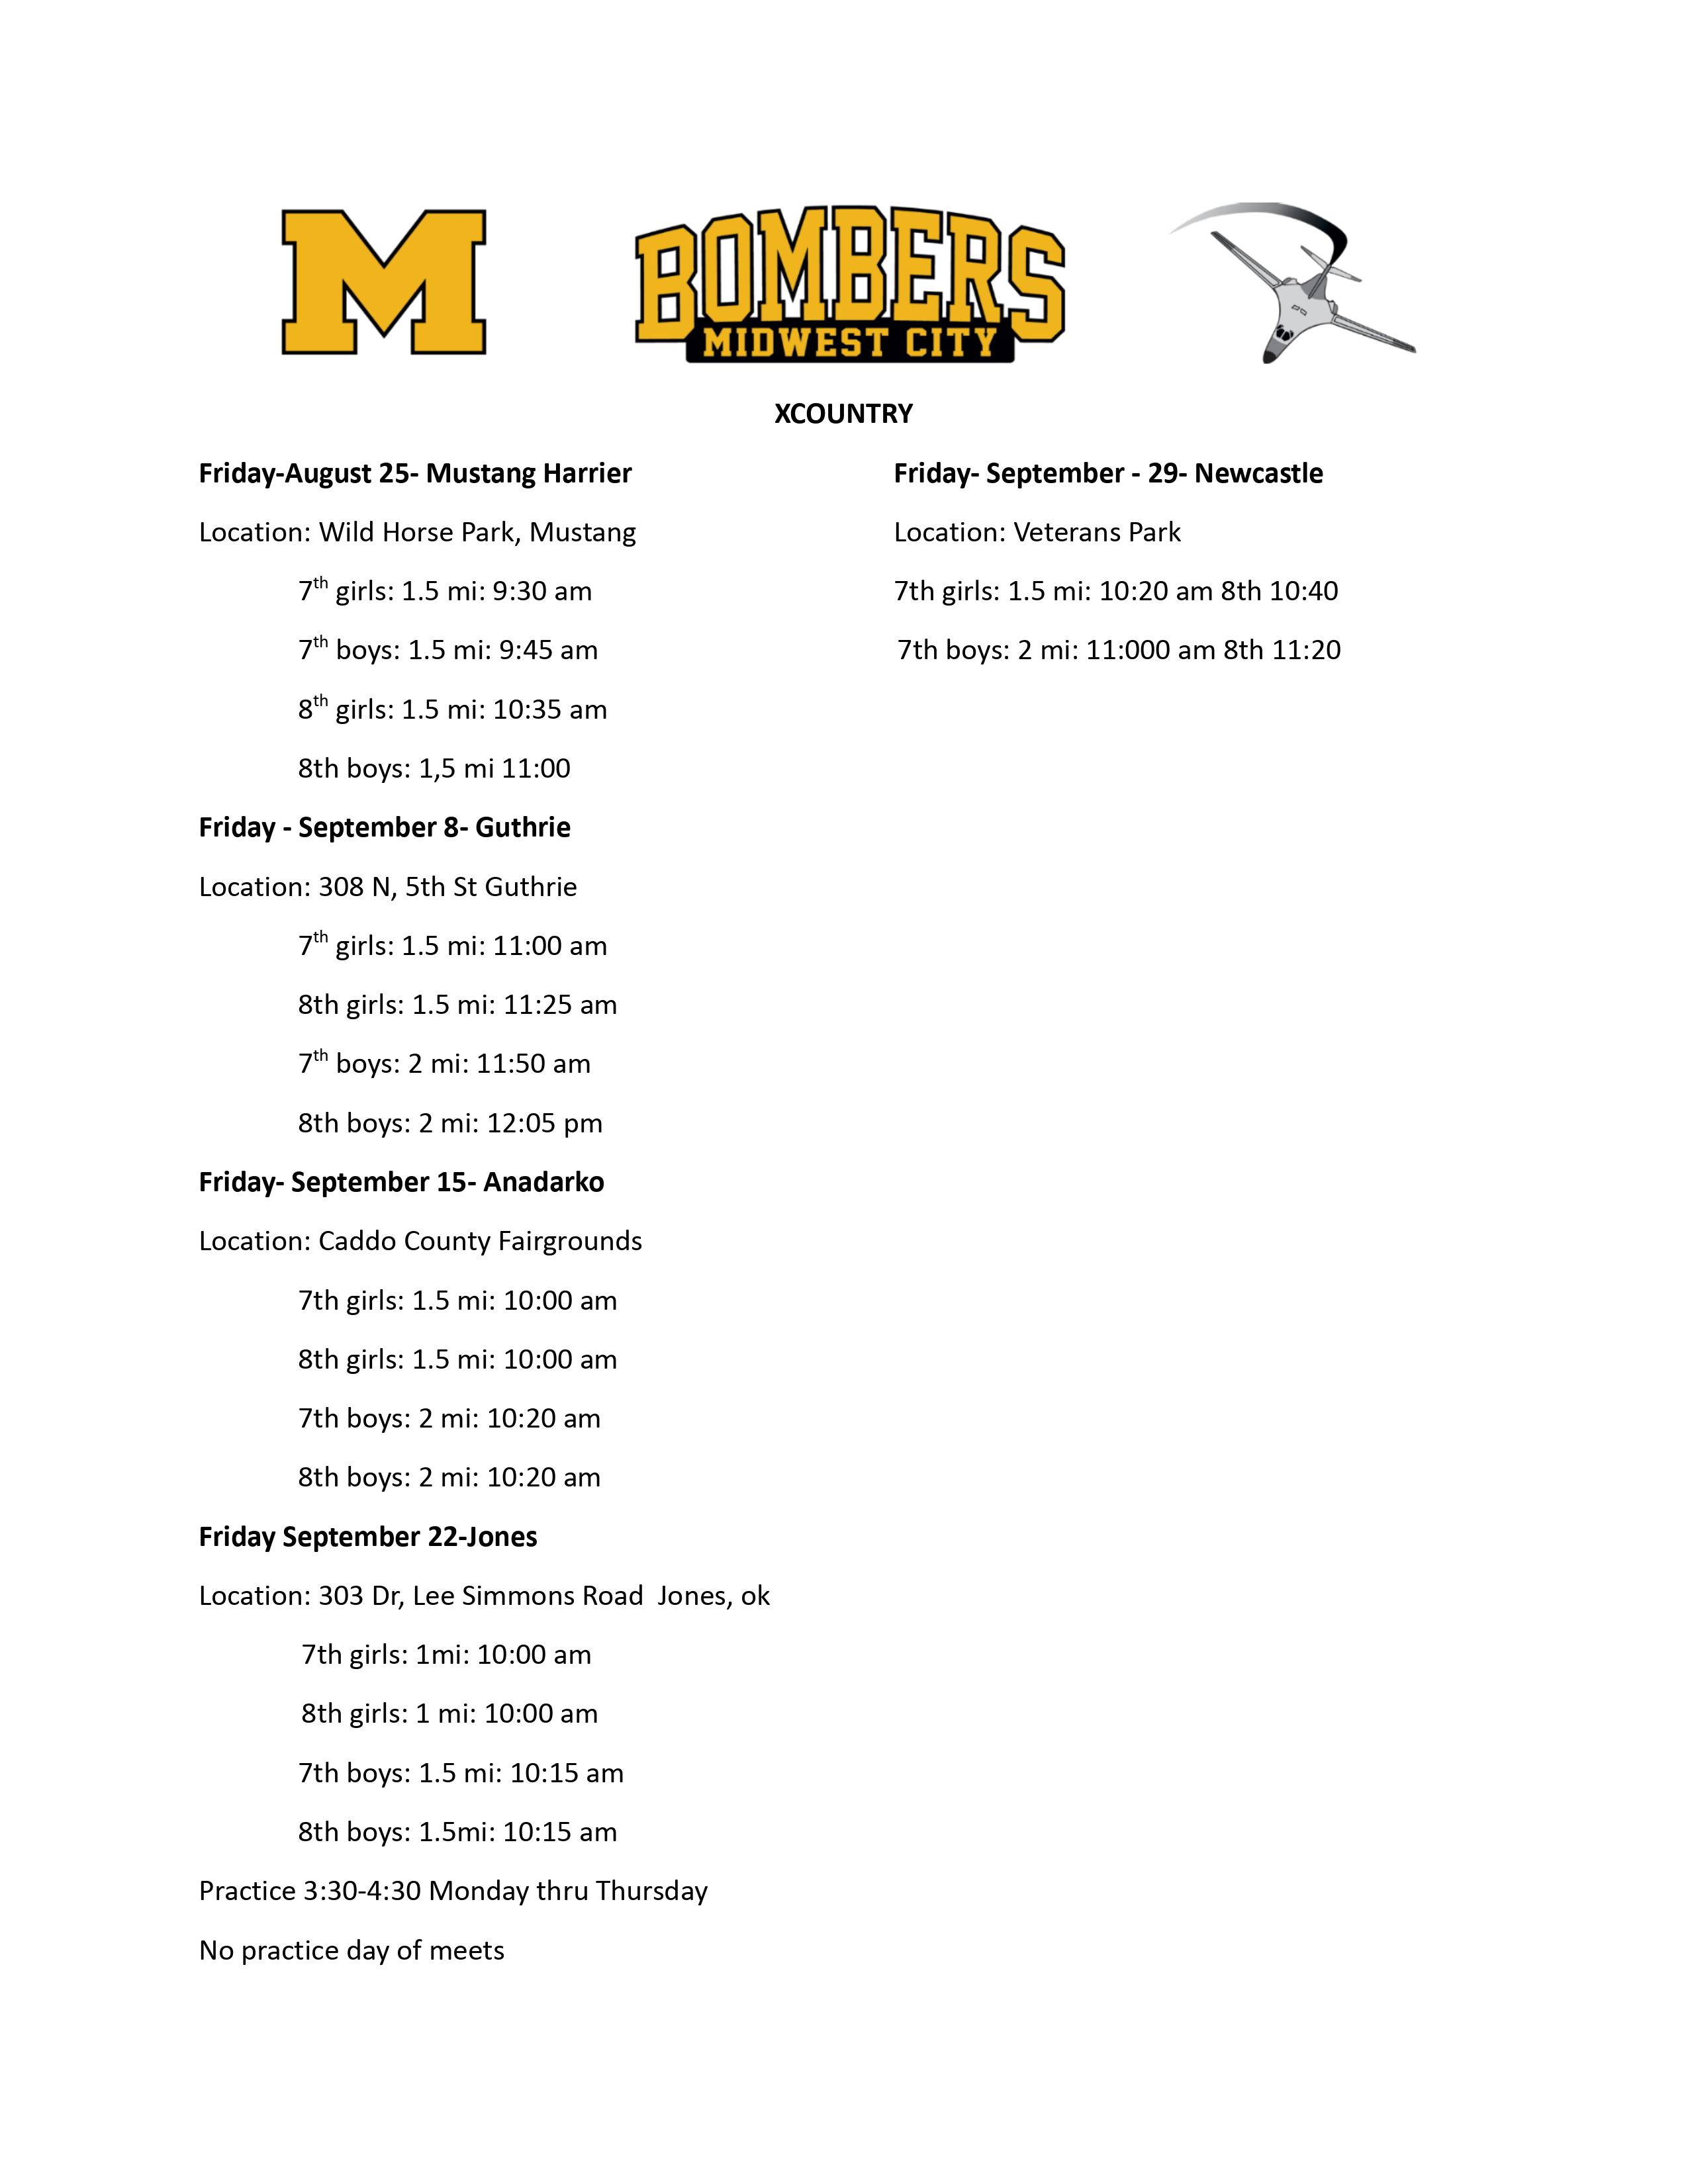 updated cross country schedule